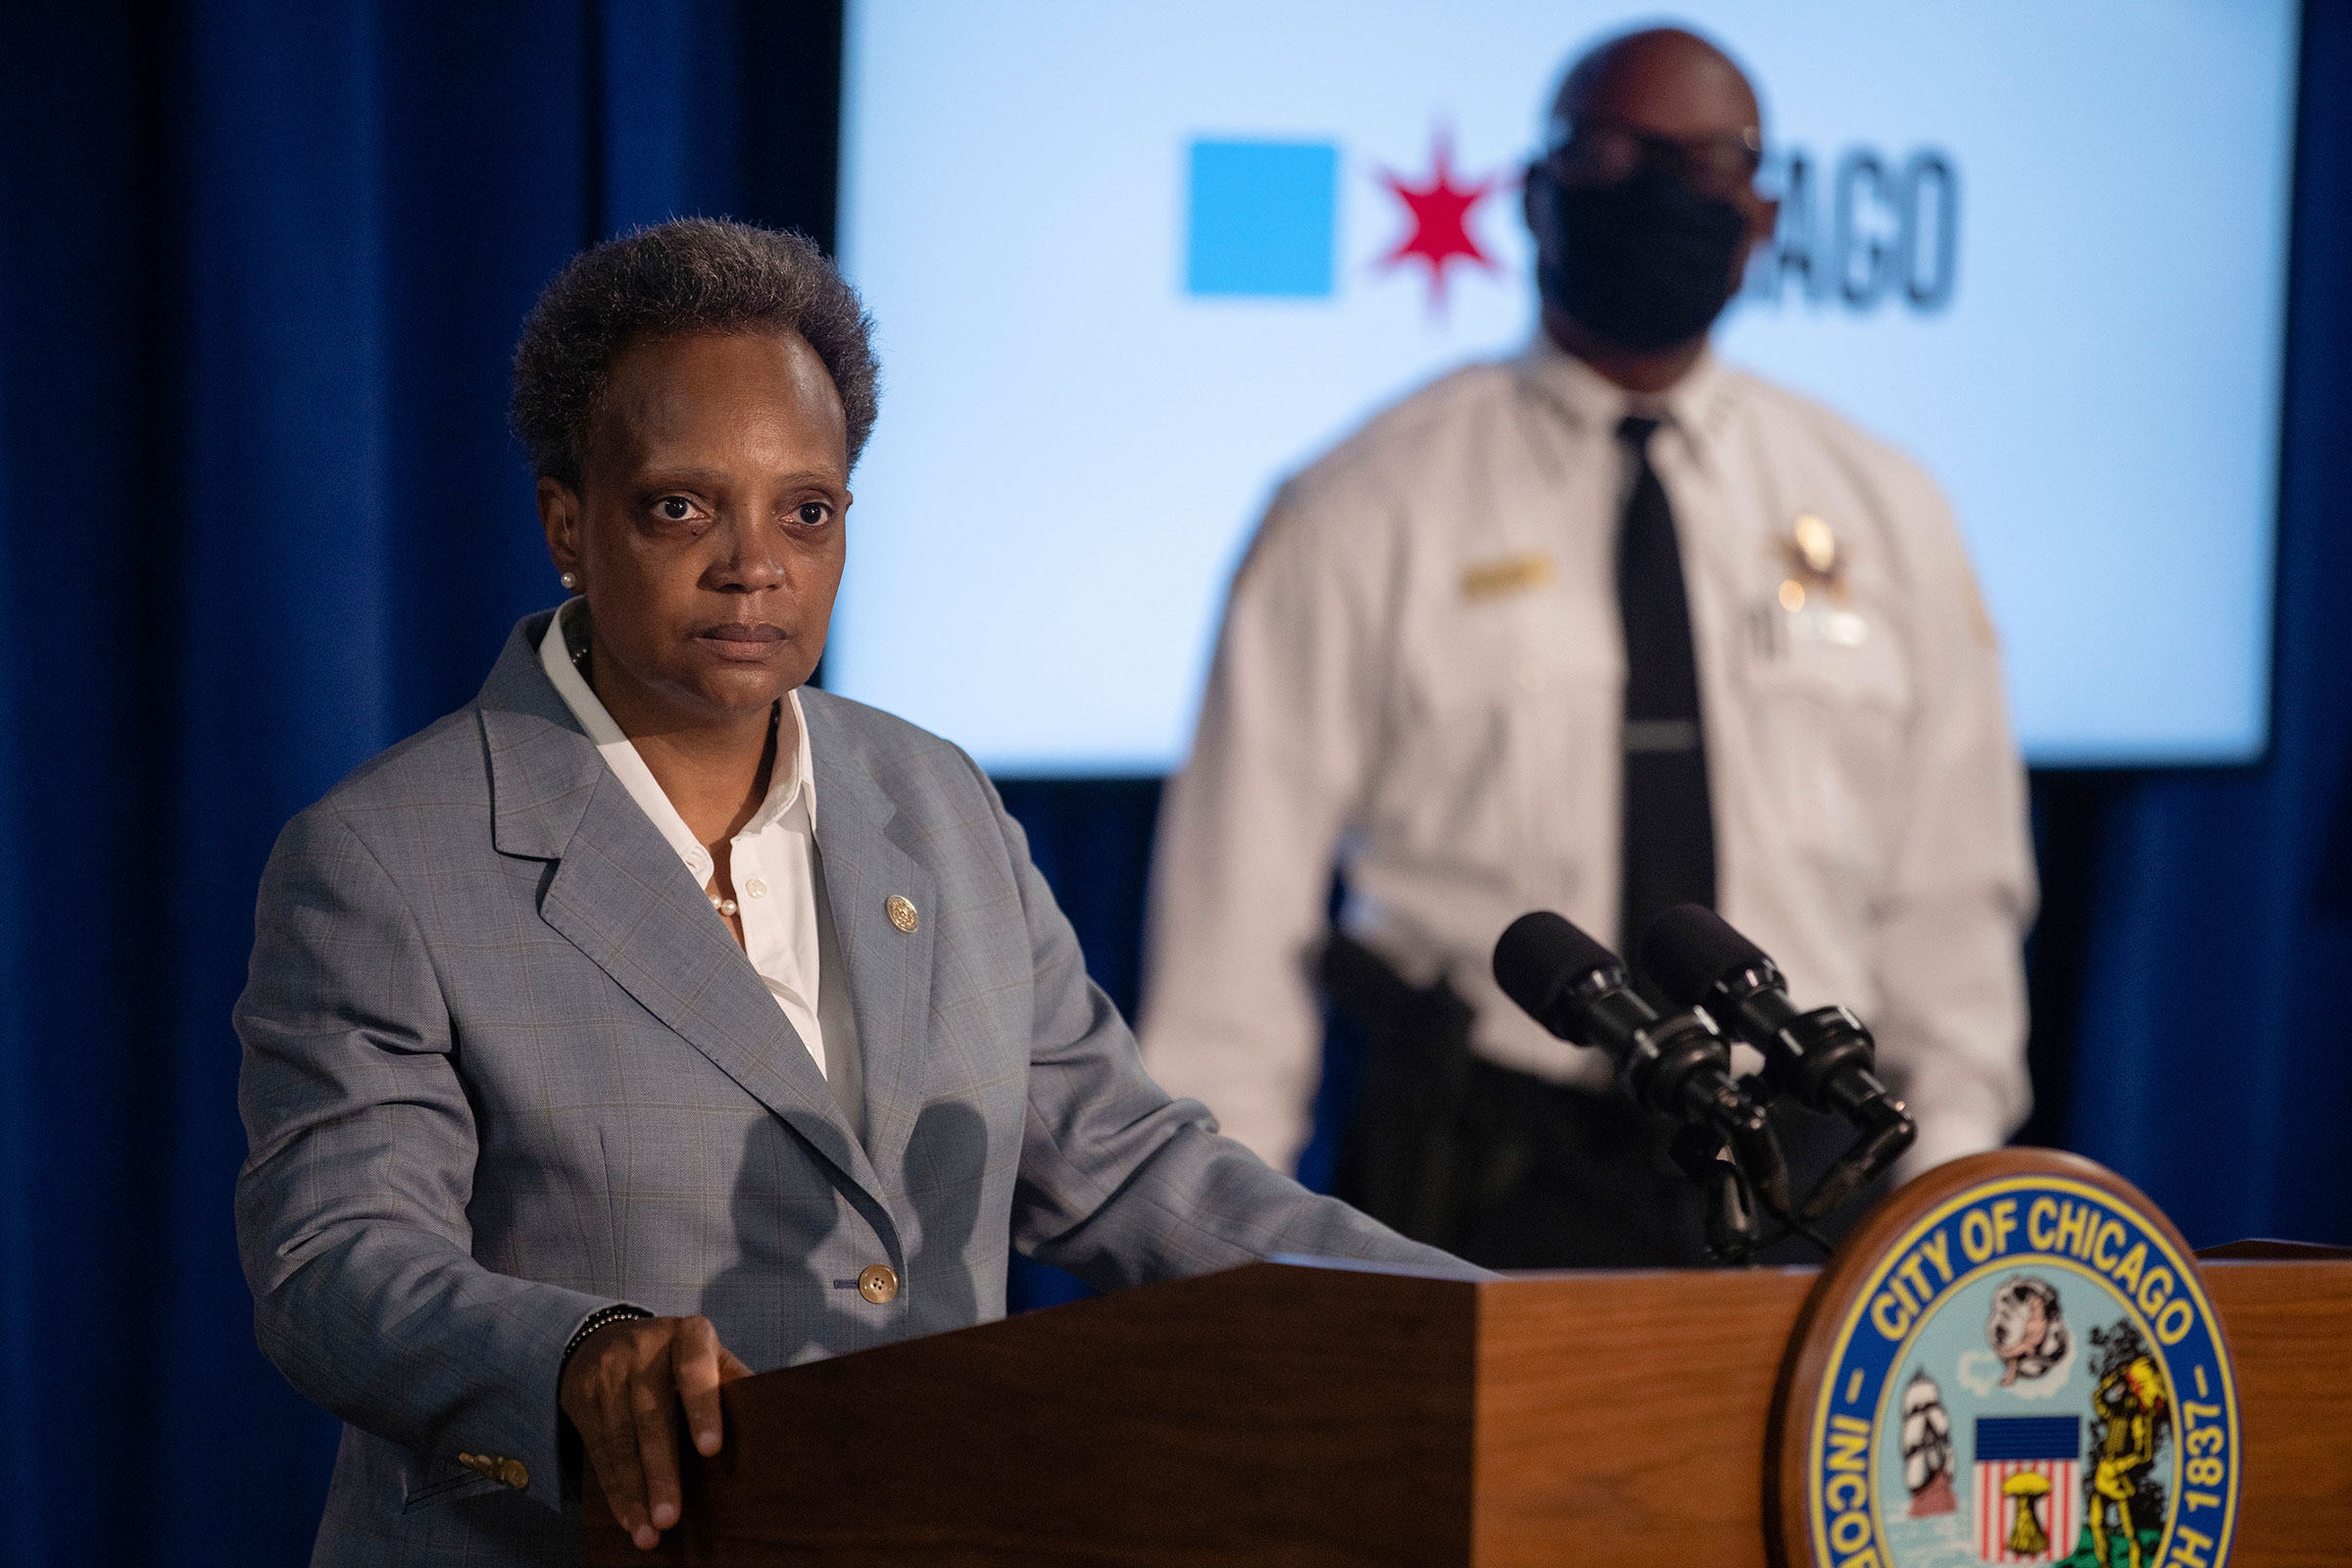 Mayor Lori Lightfoot speaks during a press conference at City Hall, in Chicago, on July 22, 2020 after multiple people were shot outside a funeral home in Gresham. (Pat Nabong—Chicago Sun-Times/AP)